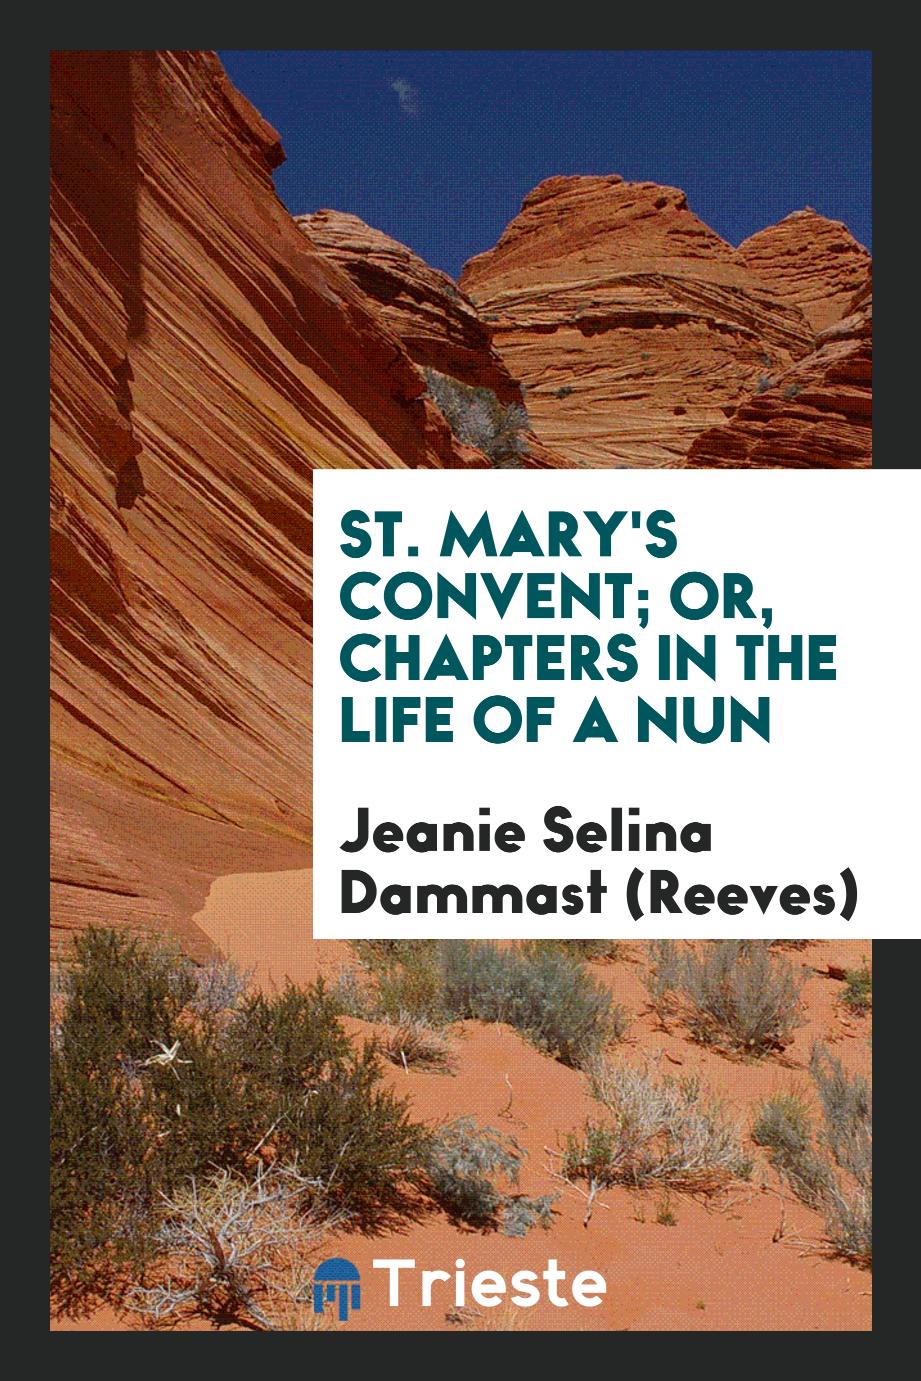 St. Mary's Convent; Or, Chapters in the Life of a Nun